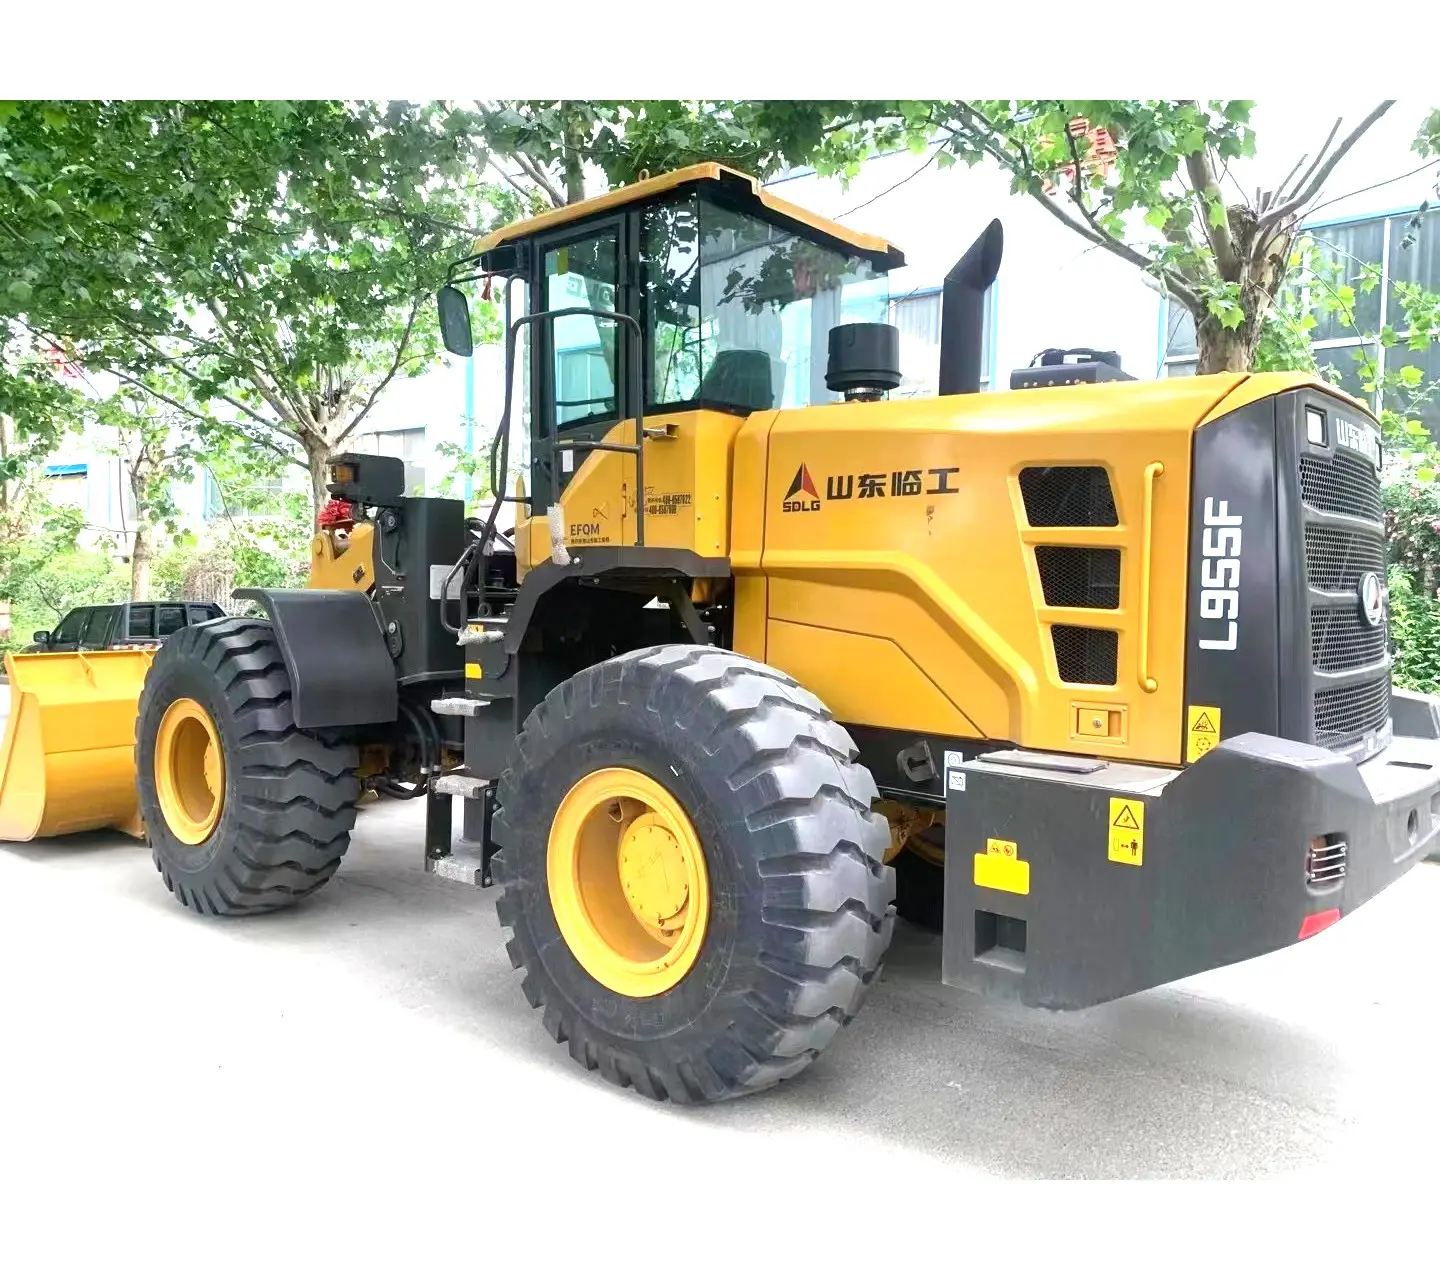 Year 2019 New used Medium-sized loader China used SDLG956 LG956L wheel loader in good condition for sale